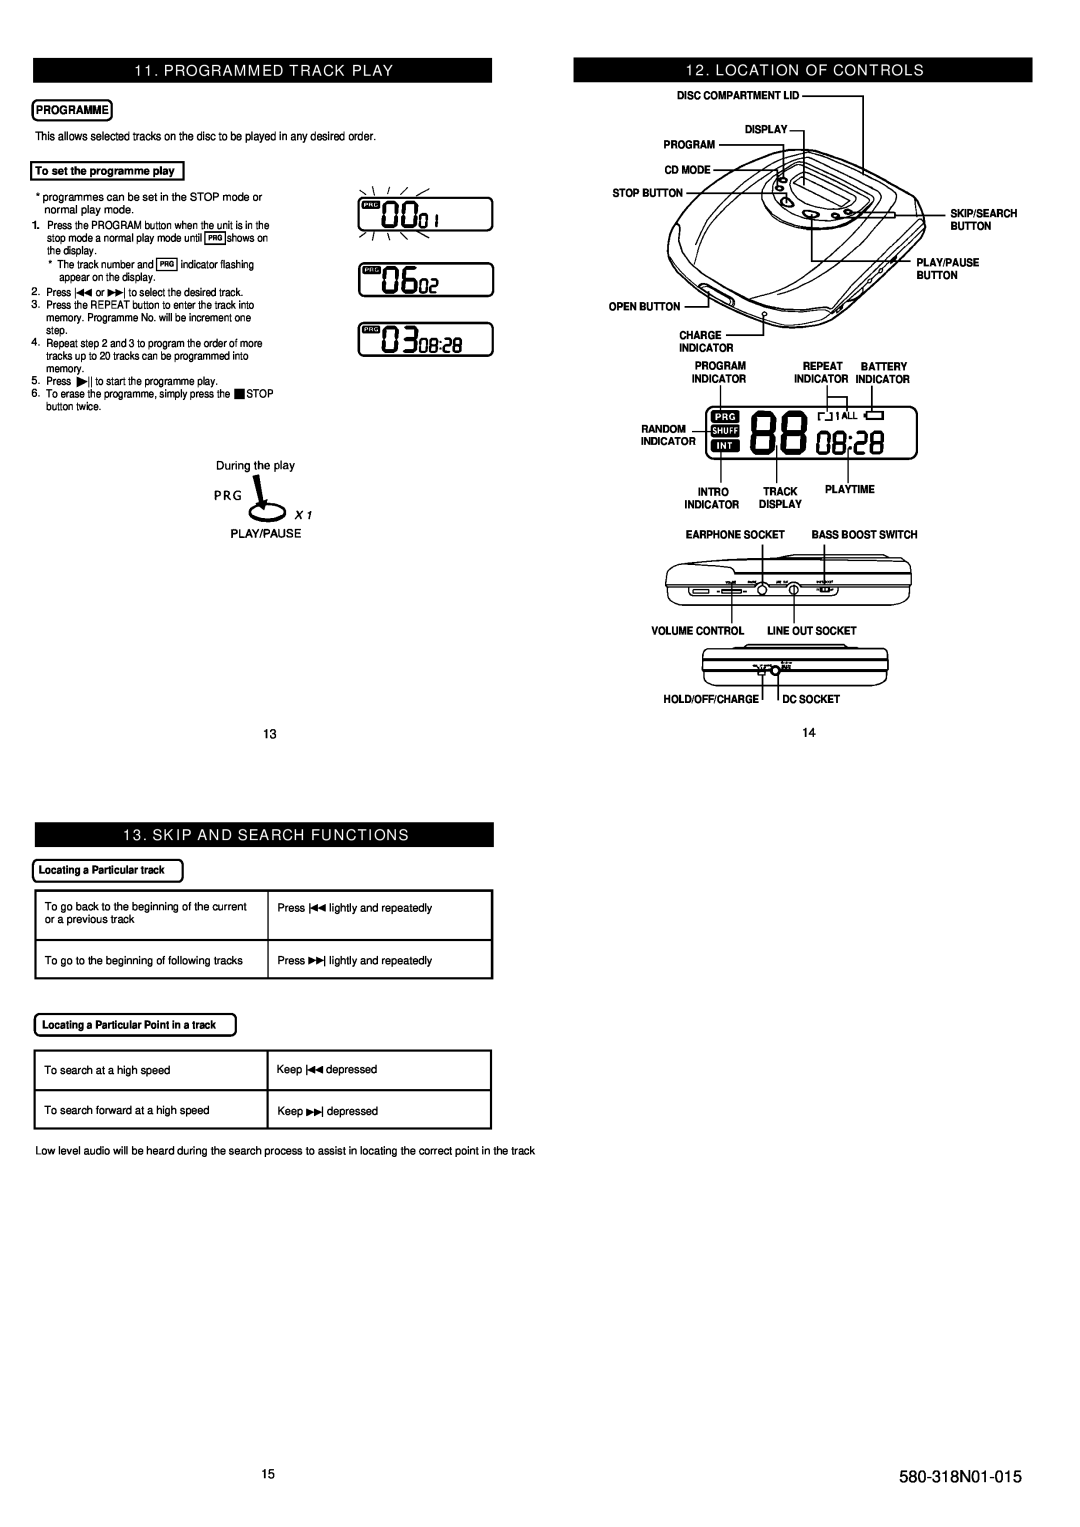 Palsonic PDM-103 instruction manual Programmed Track Play, Skip And Search Functions, Location Of Controls, 580-318N01-015 